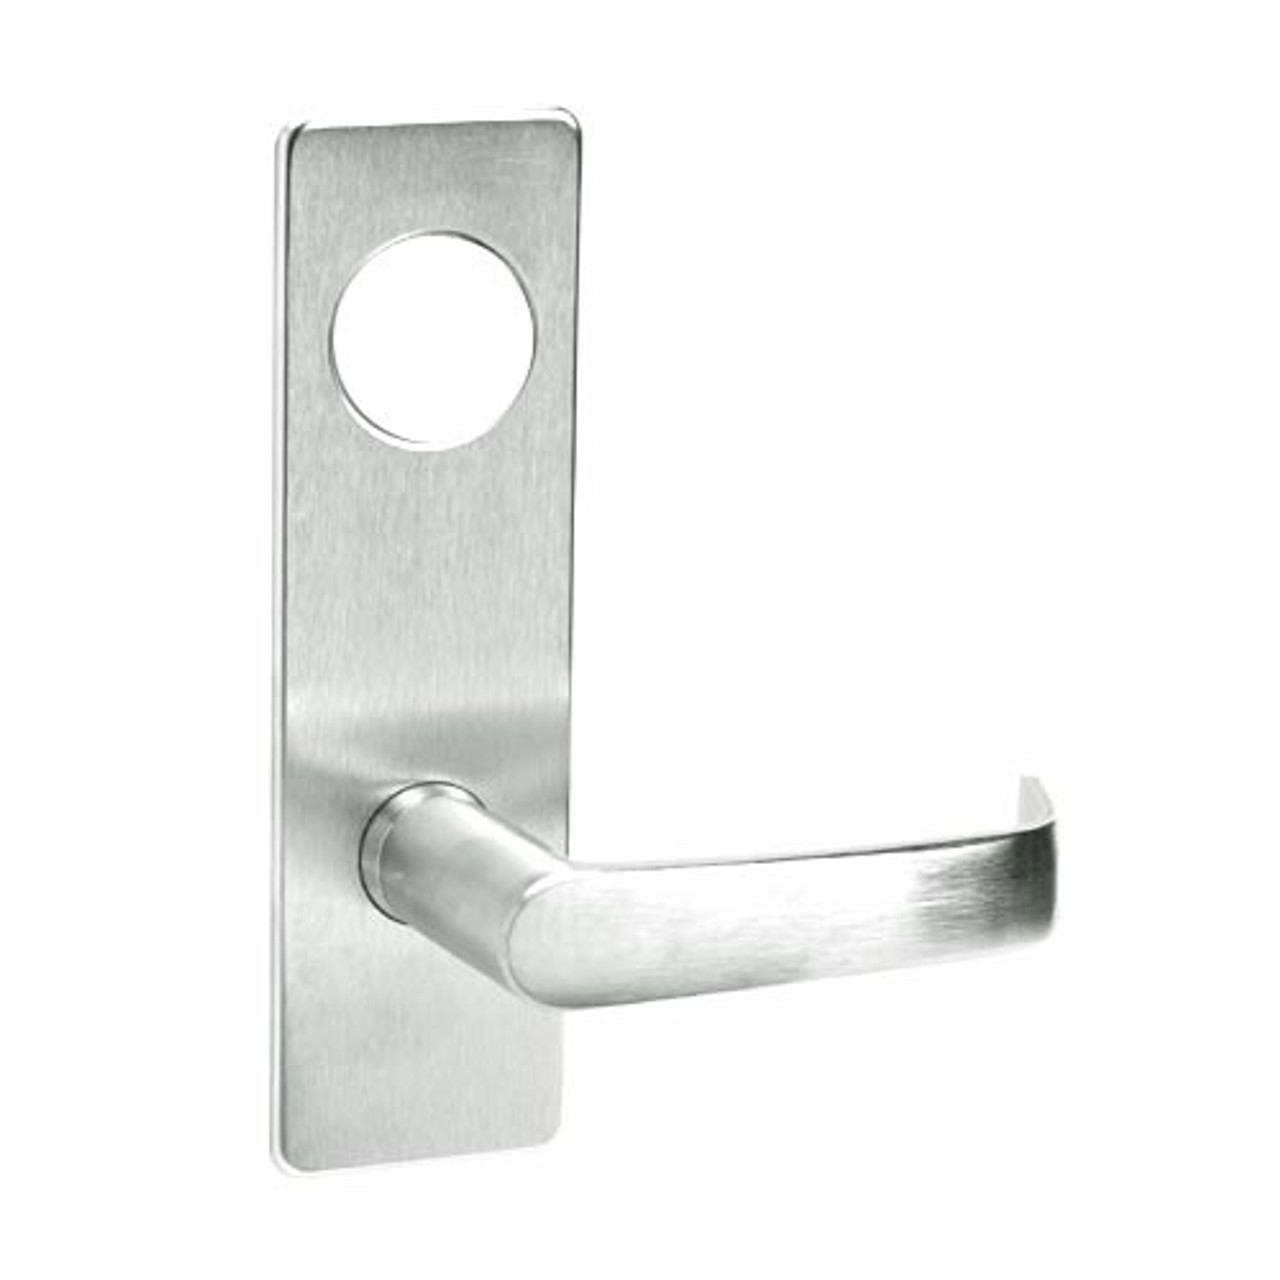 ML2048-NSP-618-CL7 Corbin Russwin ML2000 Series IC 7-Pin Less Core Mortise Entrance Locksets with Newport Lever in Bright Nickel